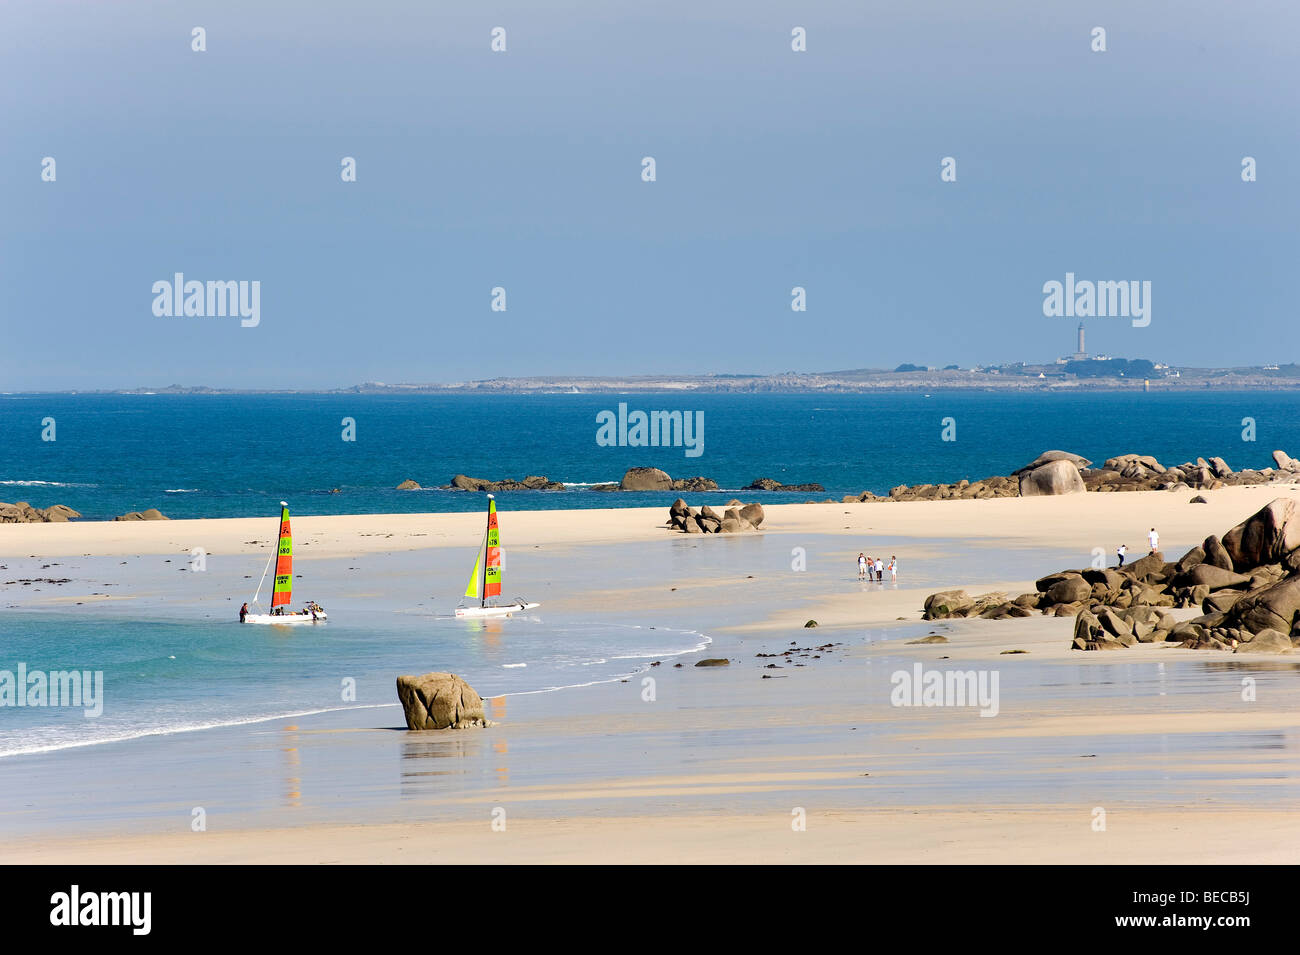 Recreational activity on the beach near Kerbrat, Cleder, Finistere, Brittany, France, Europe Stock Photo